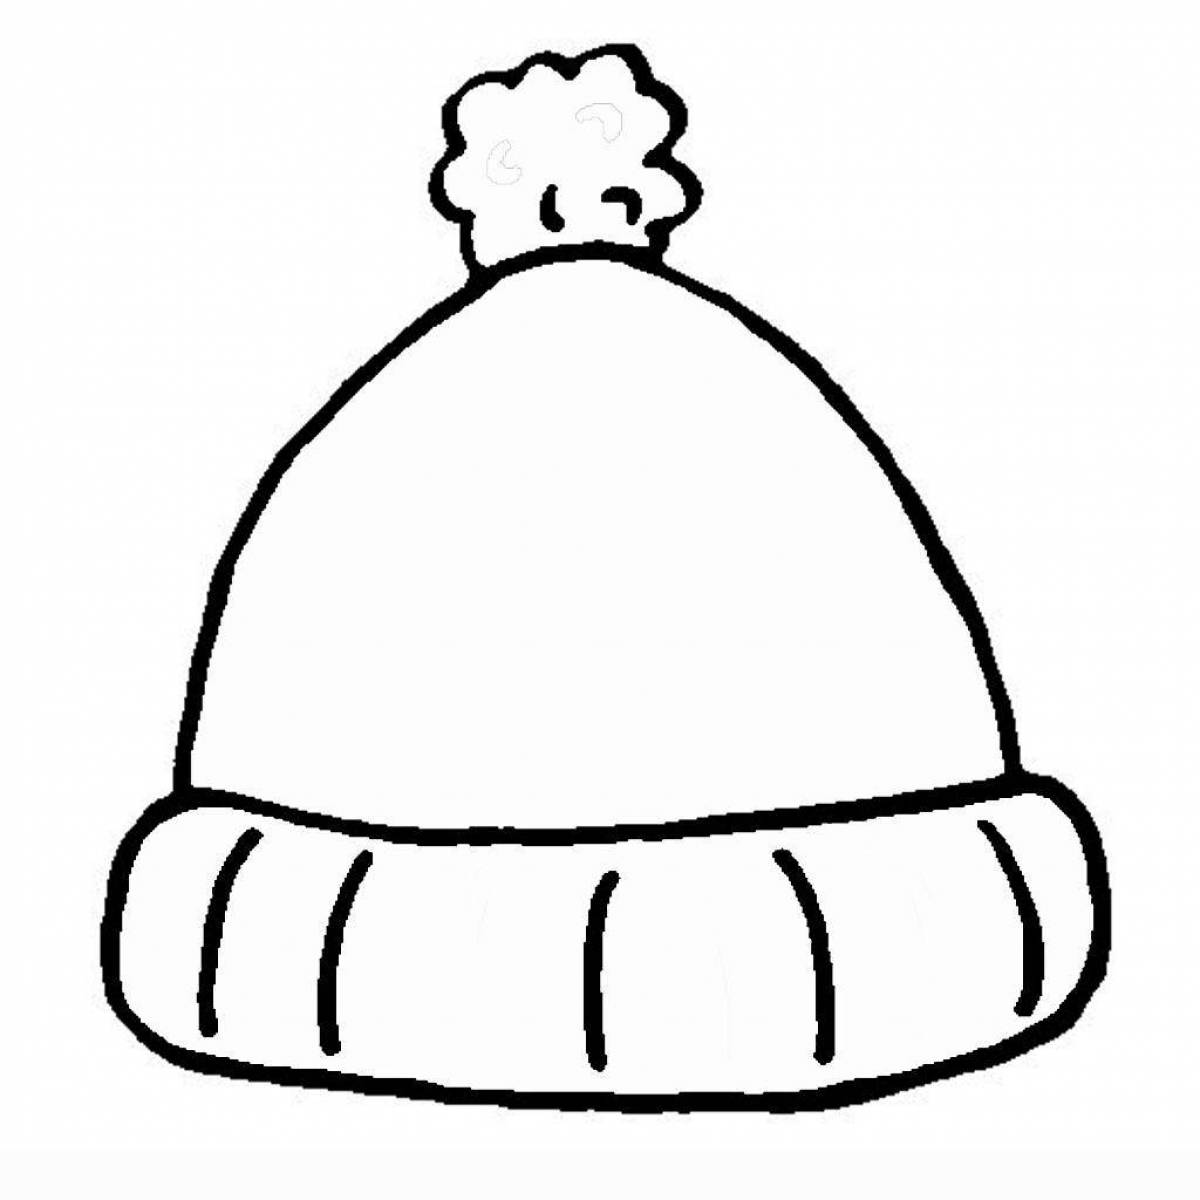 Animated hat with earflaps